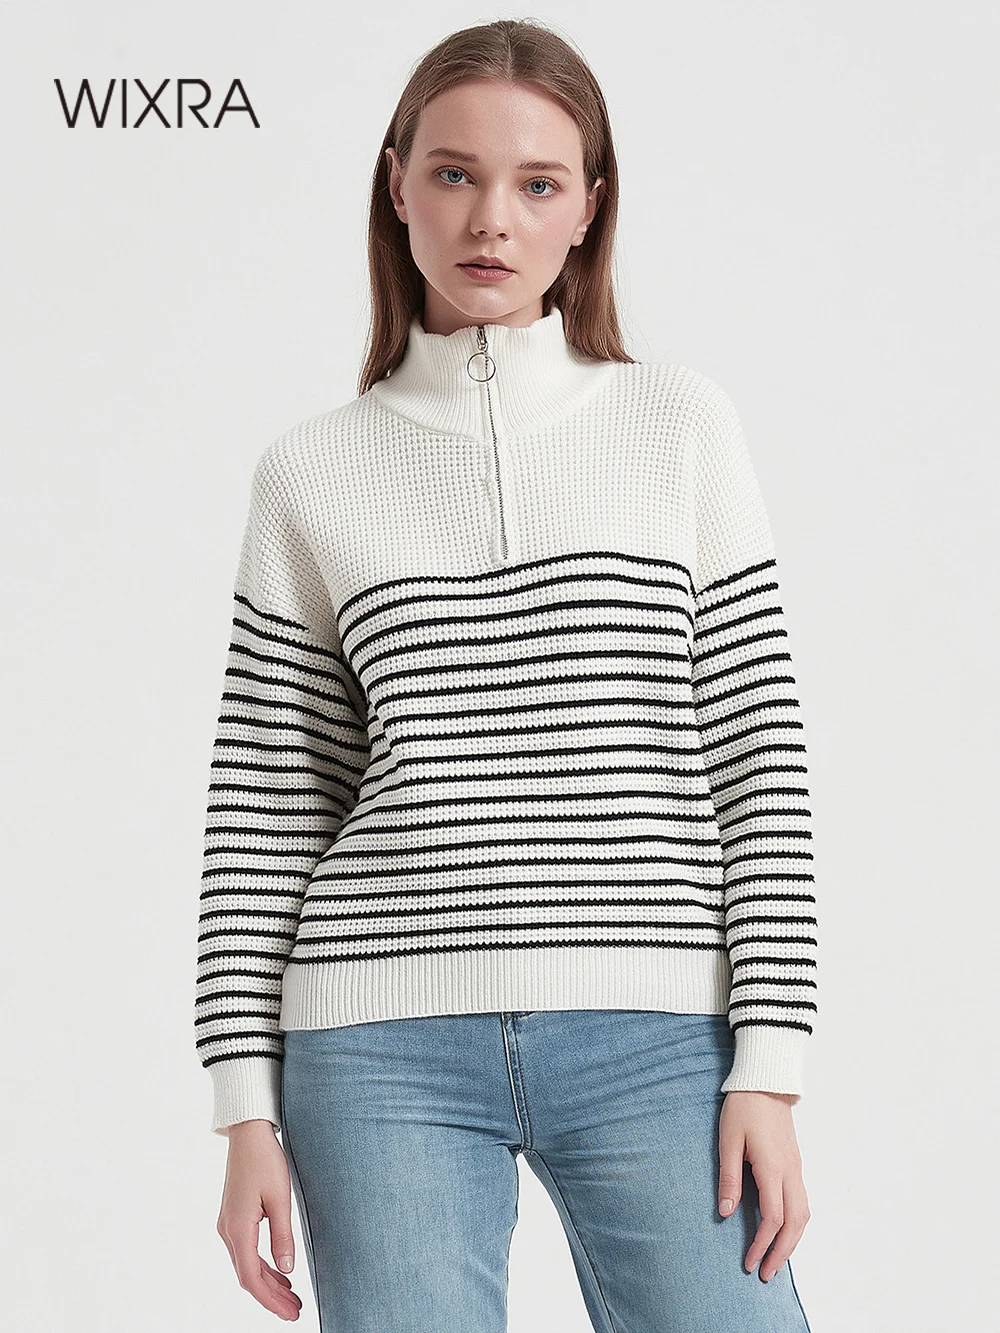 

Wixra Striped Sweater Ladies Jumper Turn Down Collar Pullover Women Full Sleeve High Street Clothing 2022 Autumn Winter